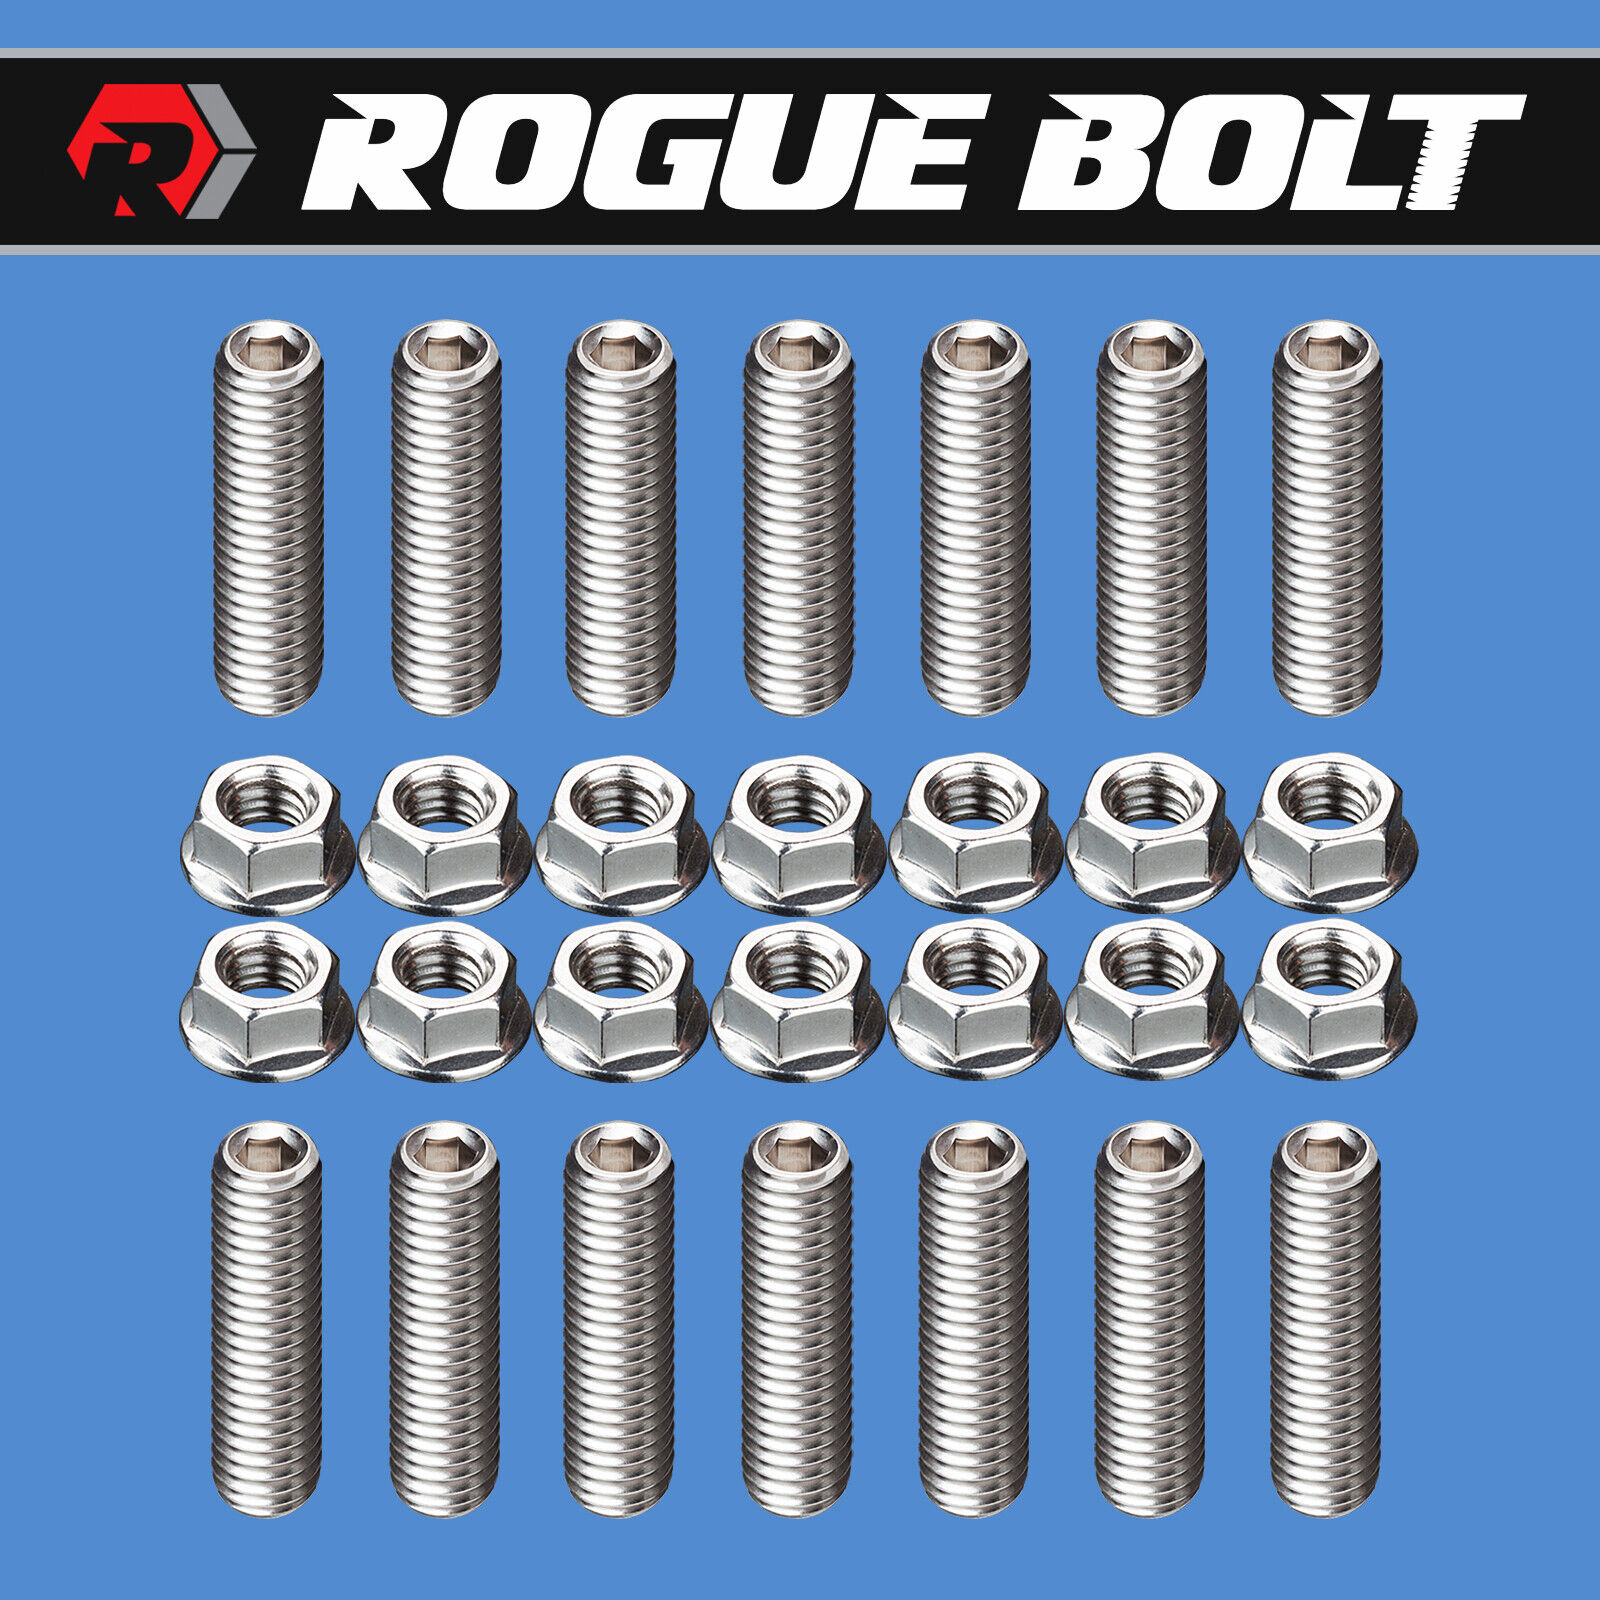 BBC 348 409 HEADER STUD KIT BOLTS STAINLESS STEEL BIG BLOCK CHEVY '58-'65